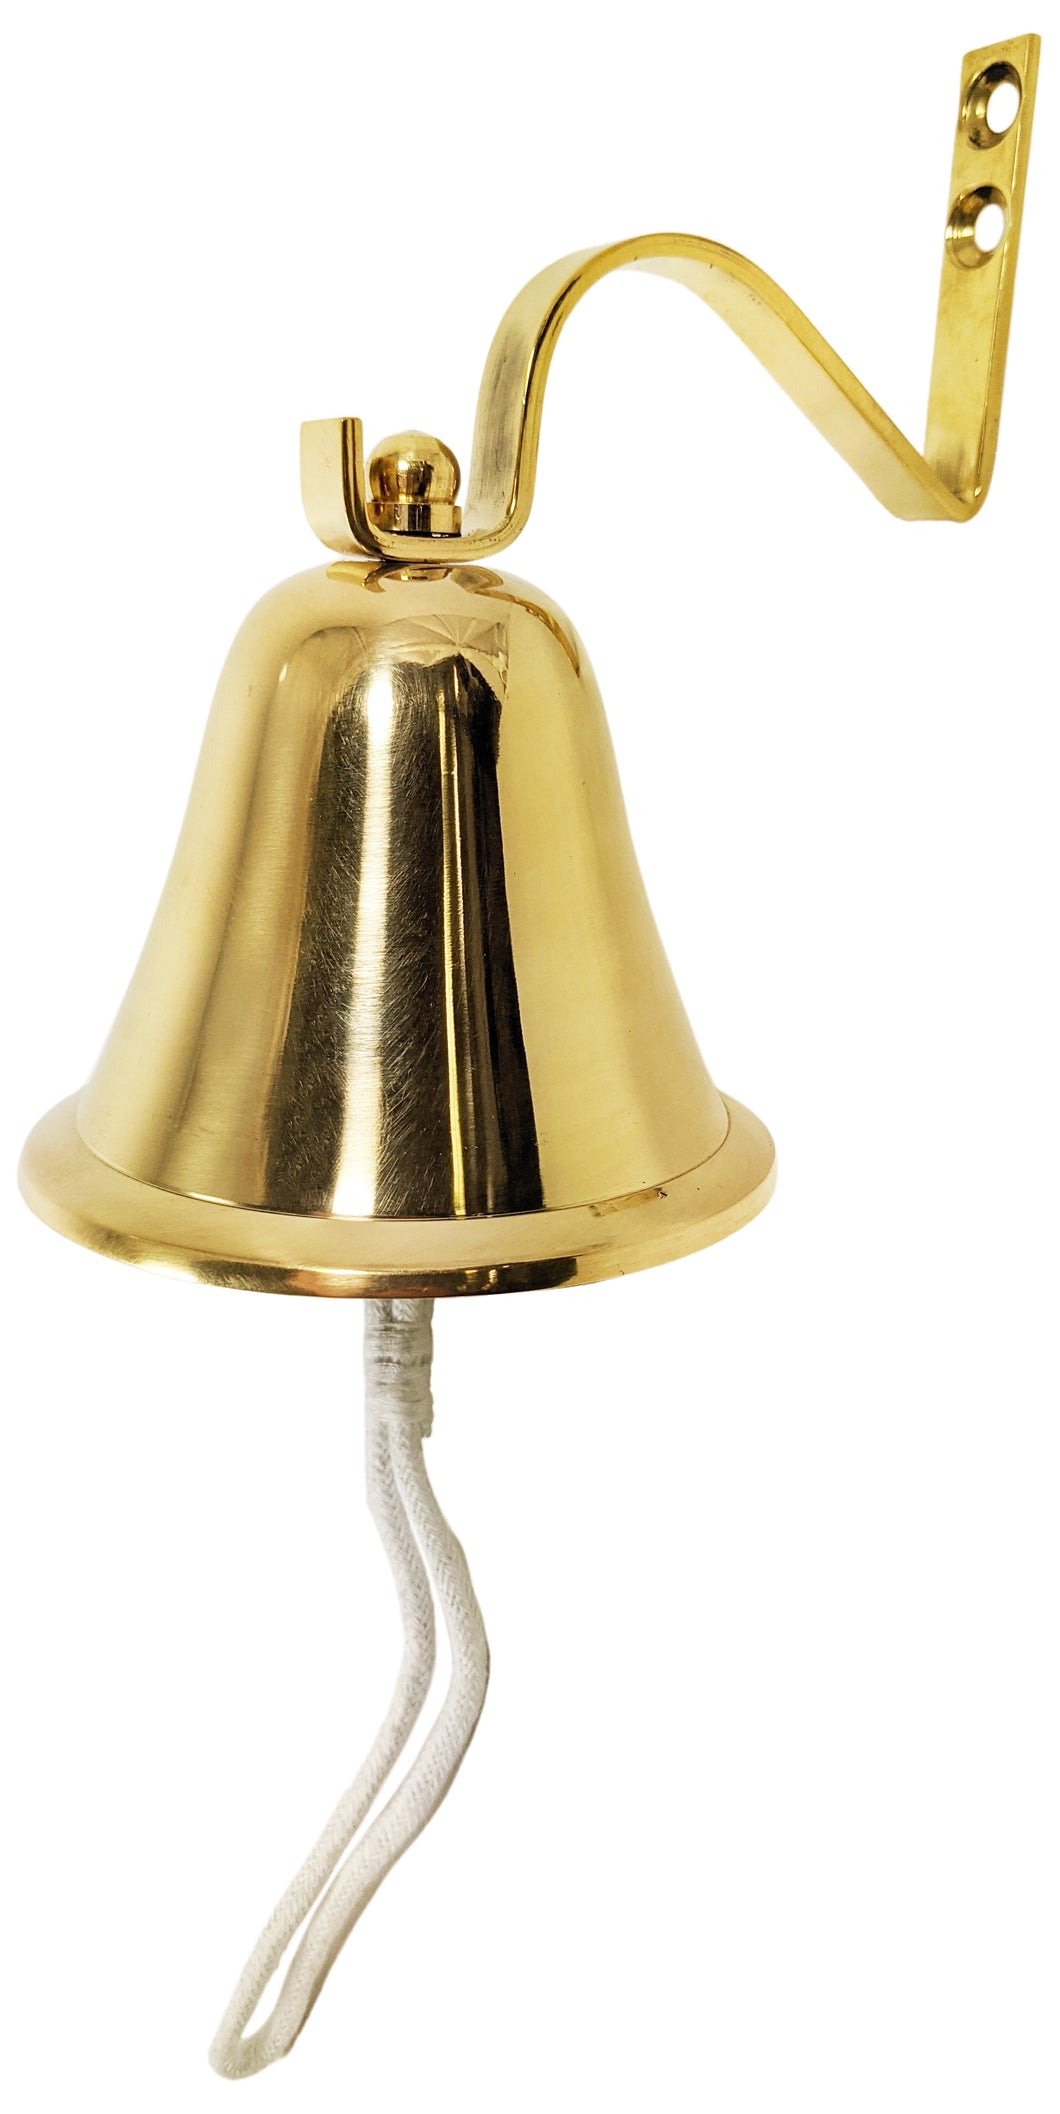 4 Inch Solid Brass Hanging Wall Bell with Rope for Ringing - Fully Functional Nautical Decoration, Wall Mountable, Loud Ring, Gold Color